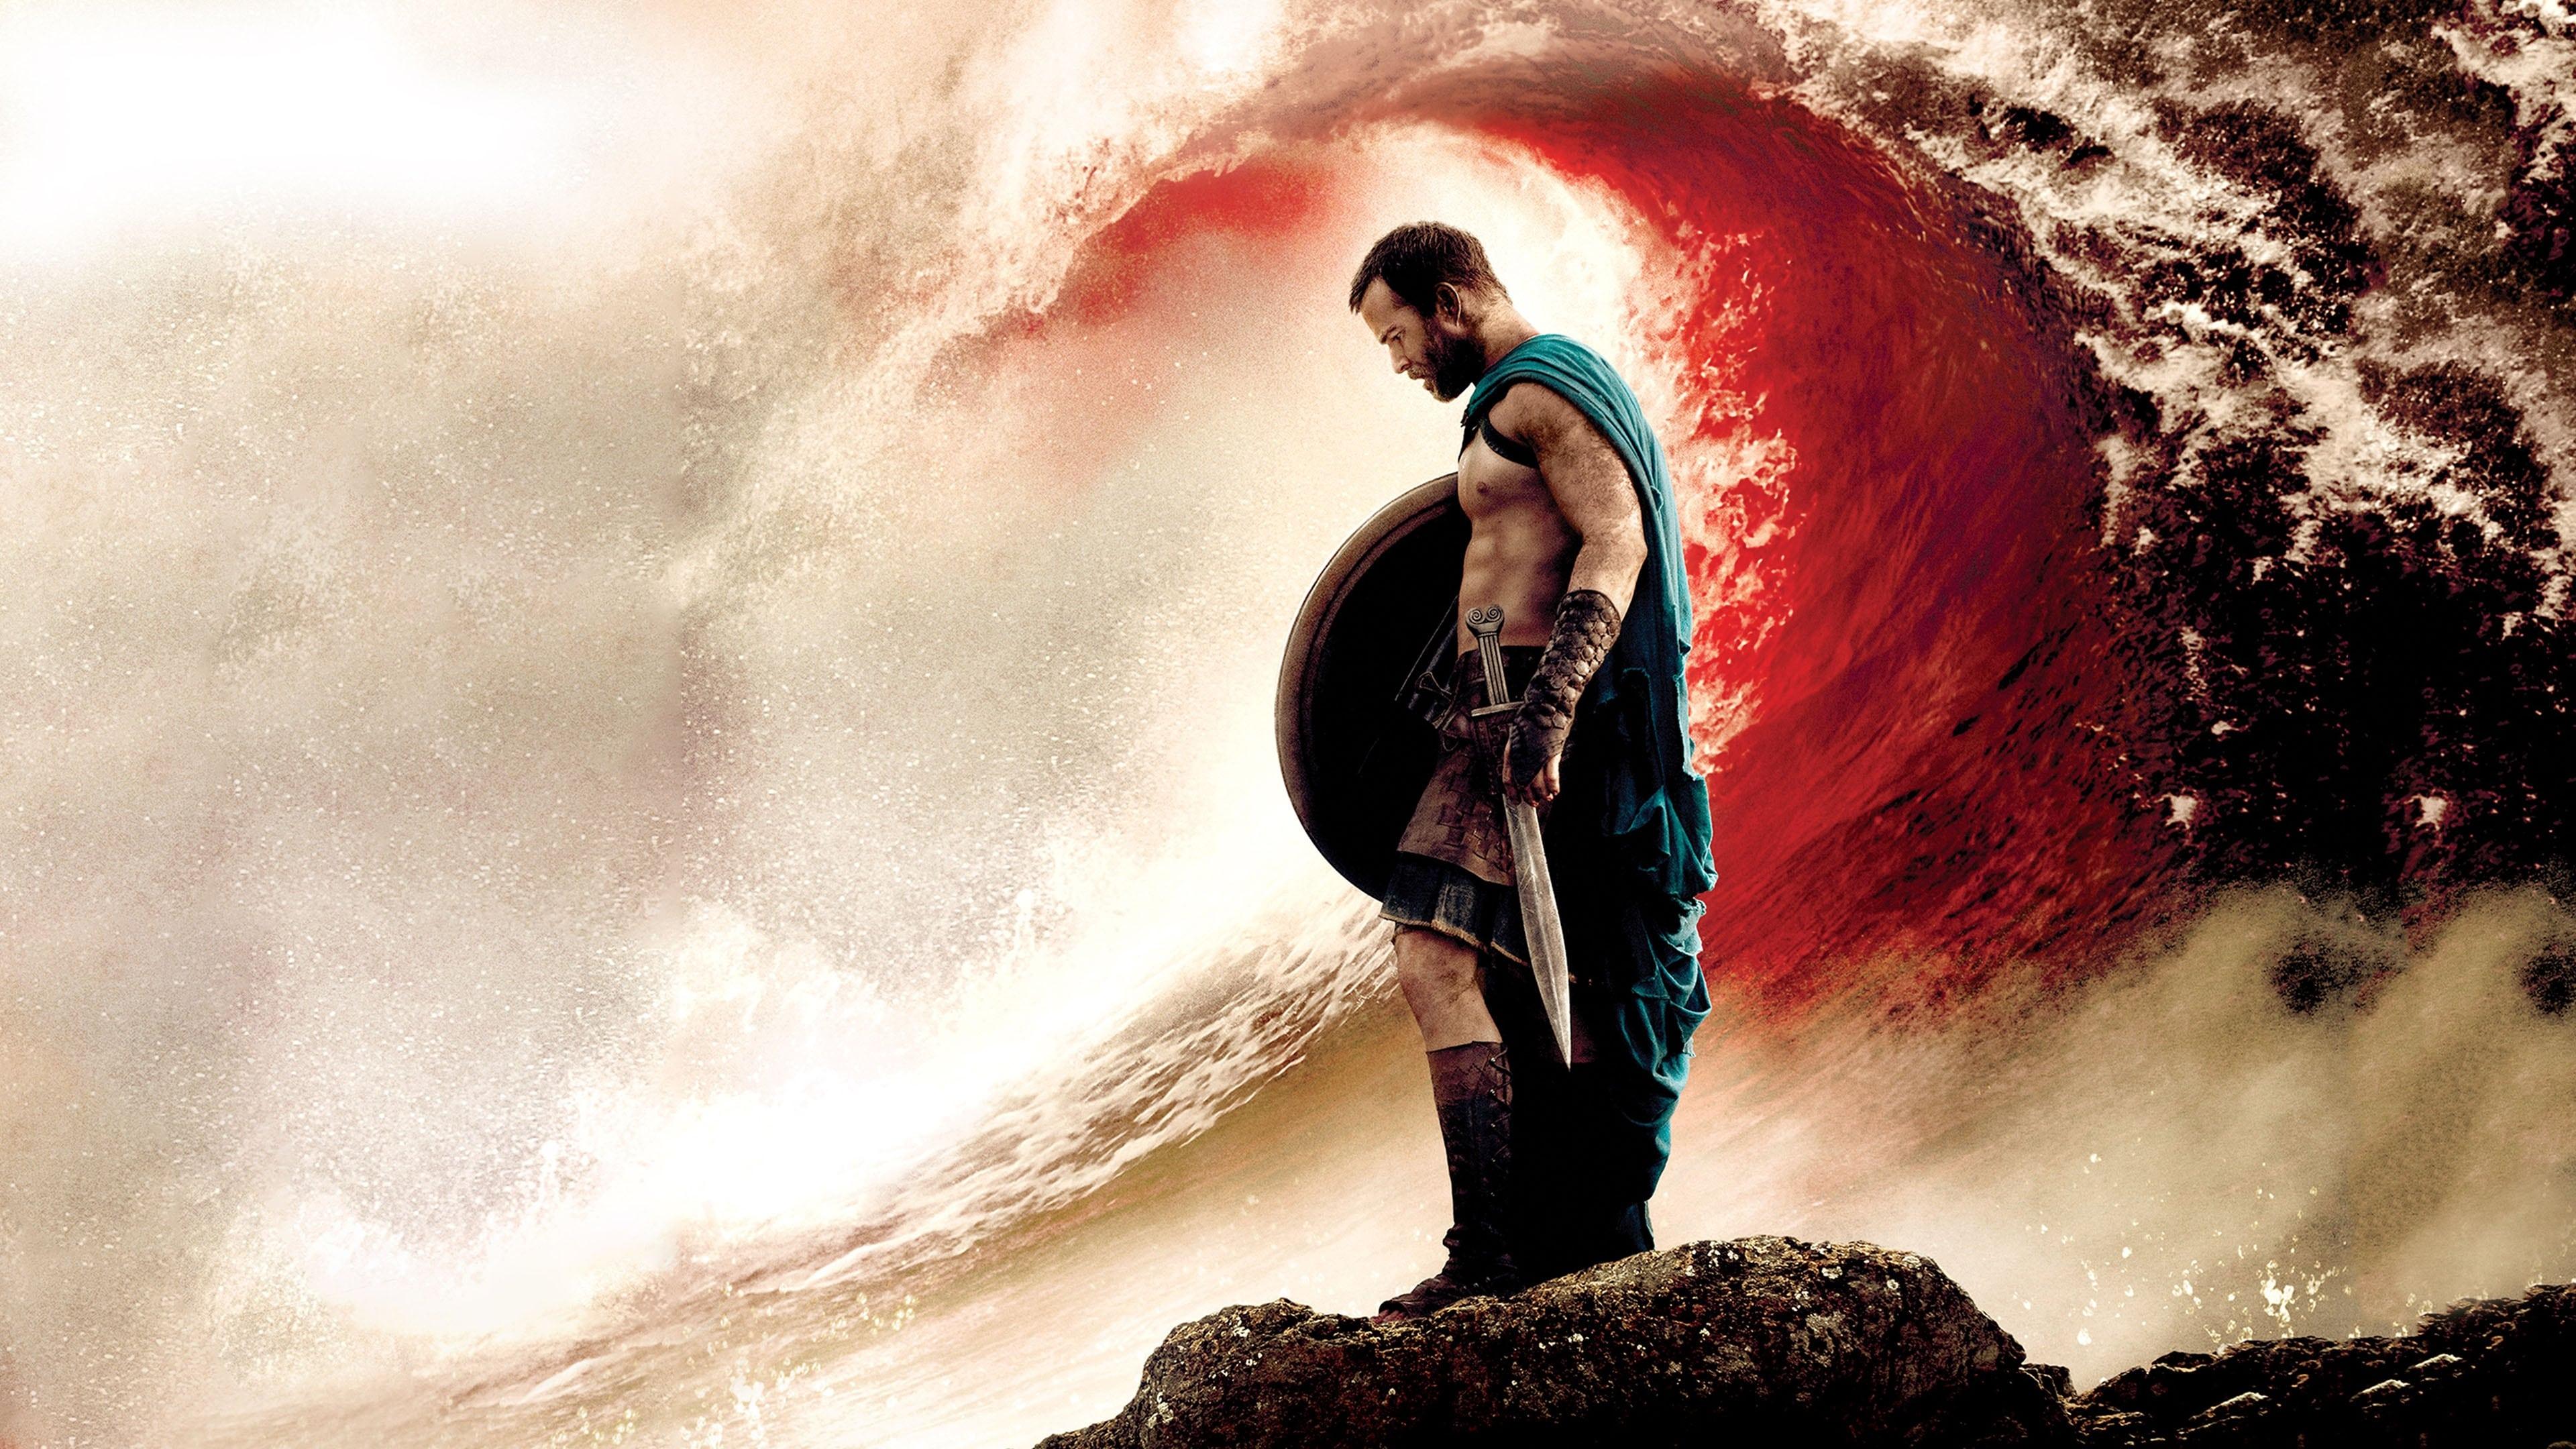 300: Rise of an Empire backdrop